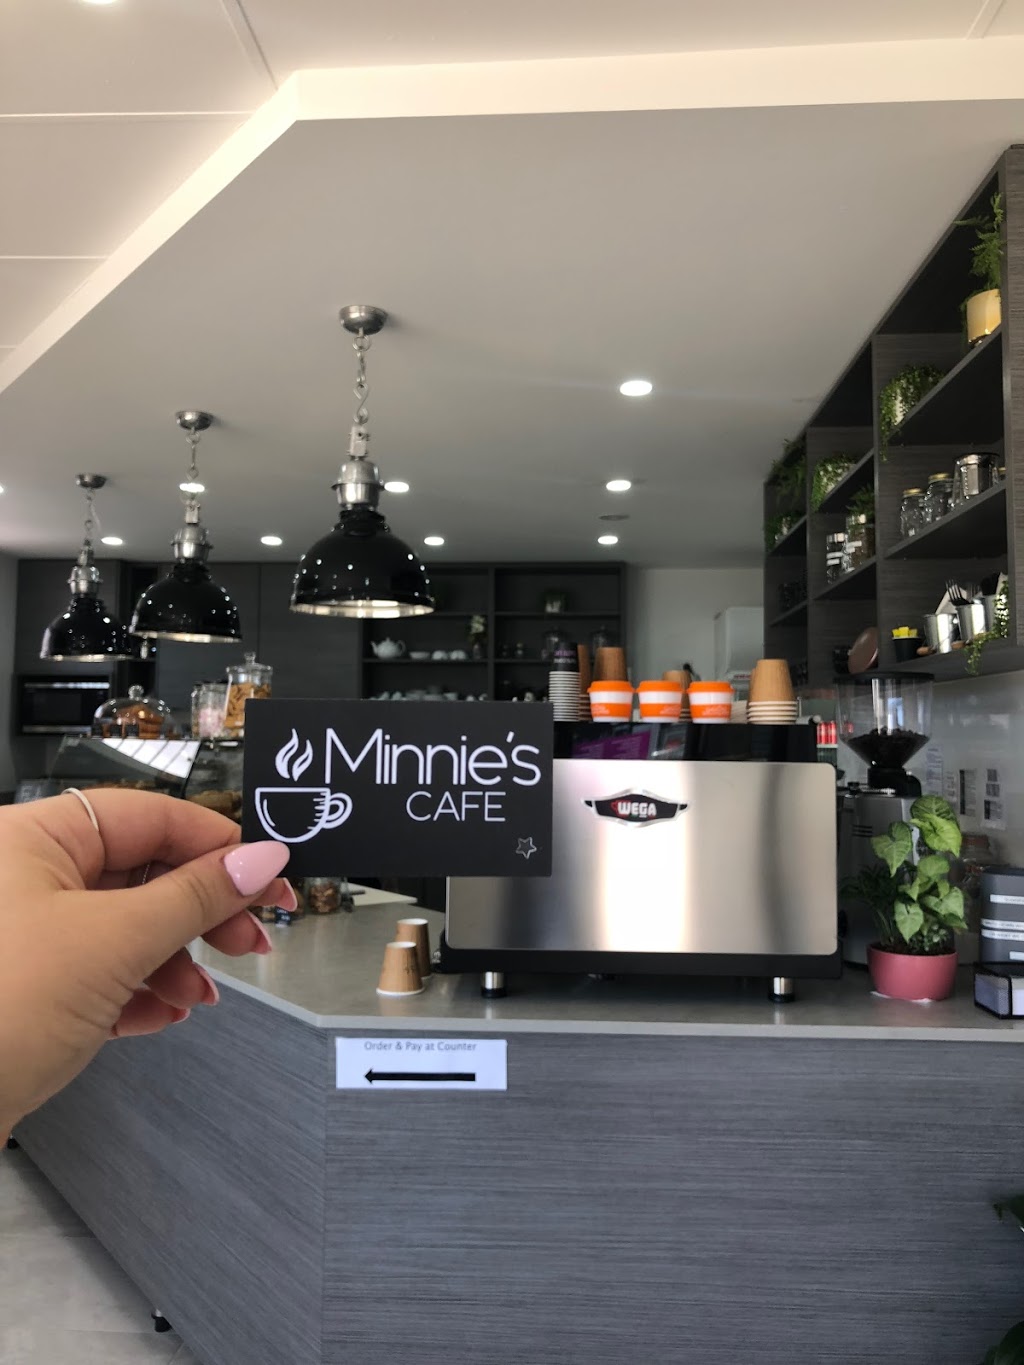 Minnies Cafe | cafe | Shop 1/101 Cann St, Bass Hill NSW 2197, Australia | 0297439119 OR +61 2 9743 9119